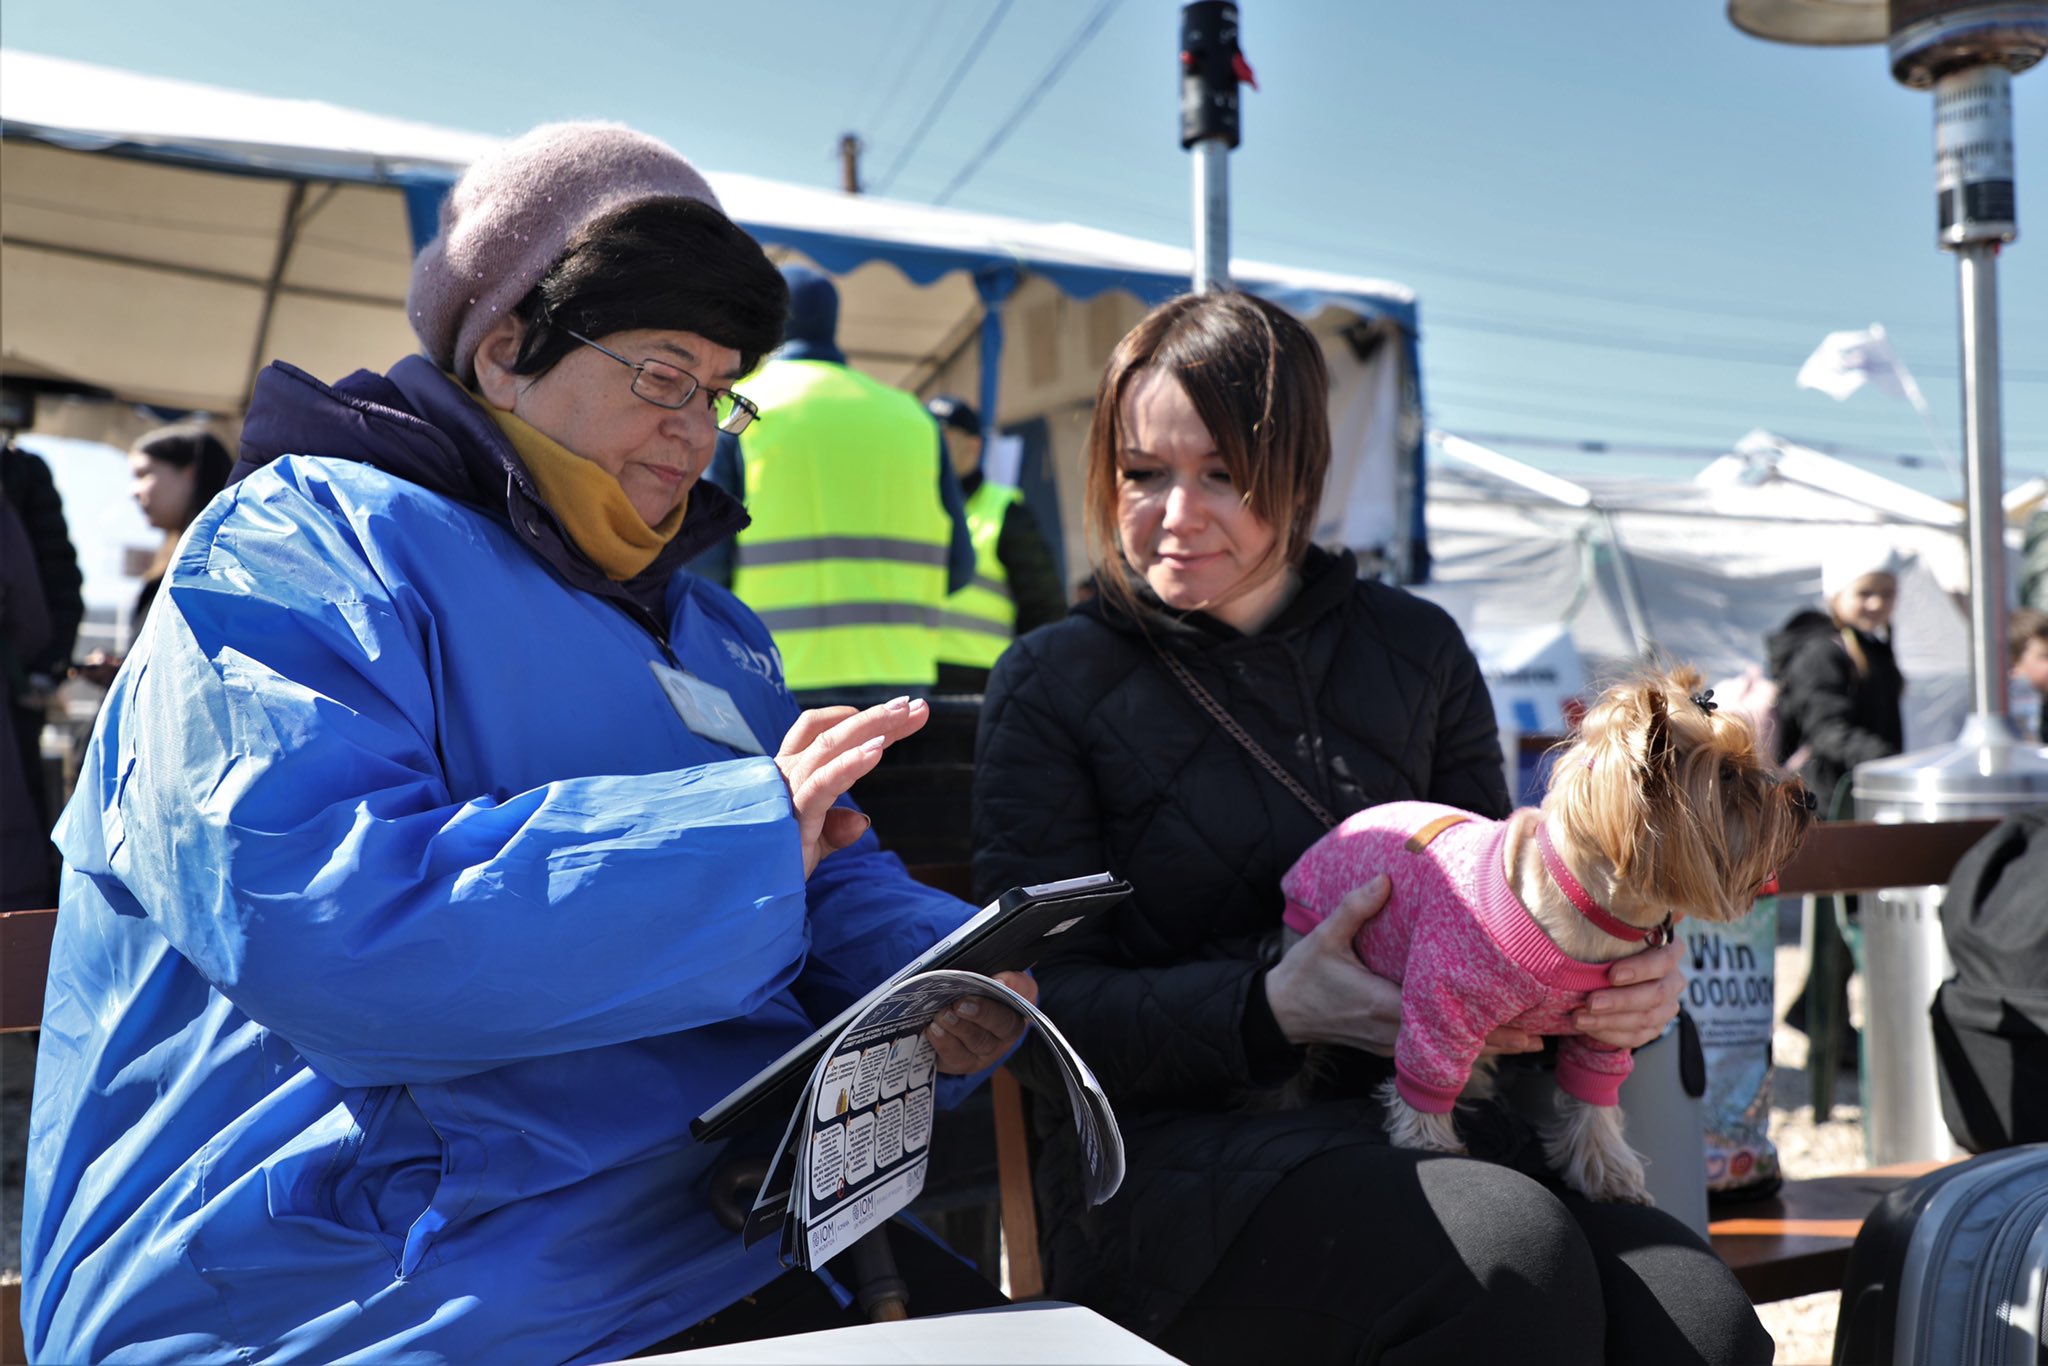 Displacement survey: Ukrainian refugees and third-country nationals 9-17 March